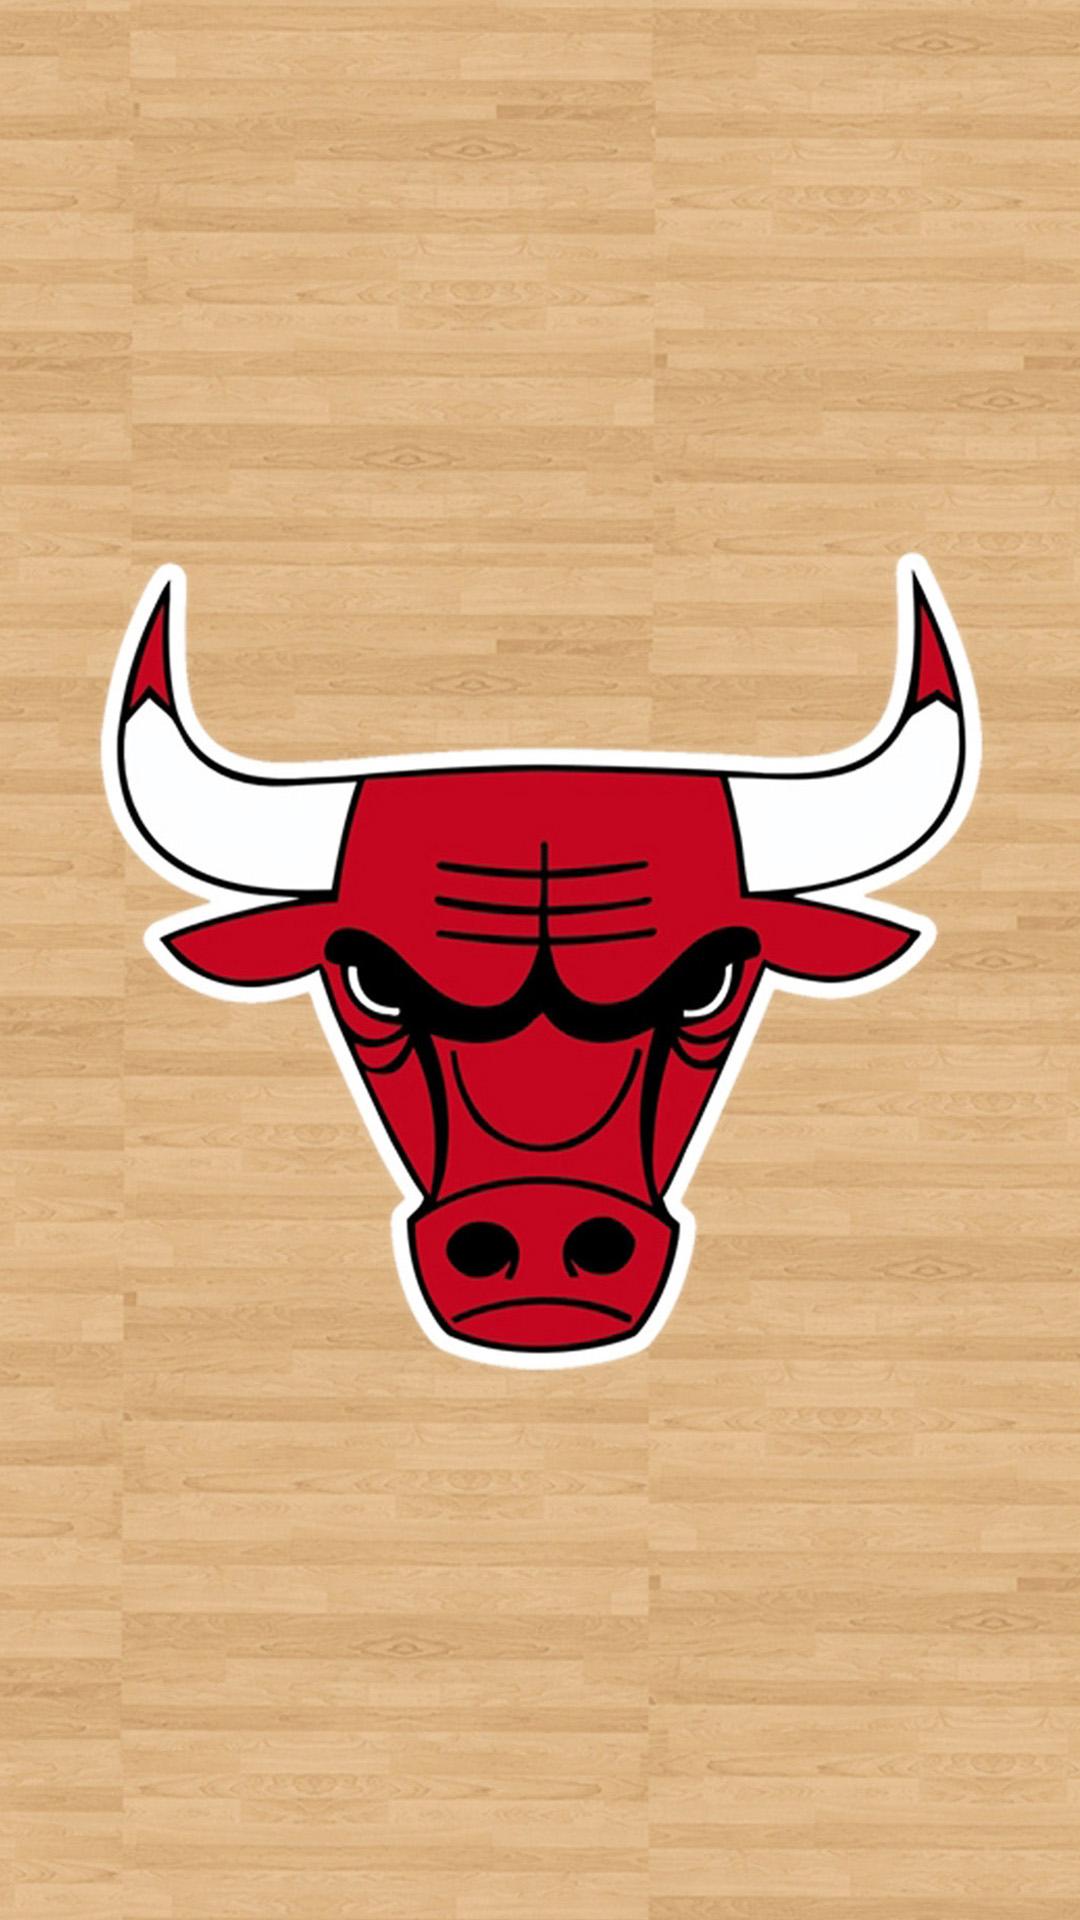 Chicago Bulls htc one wallpaper, free and easy to